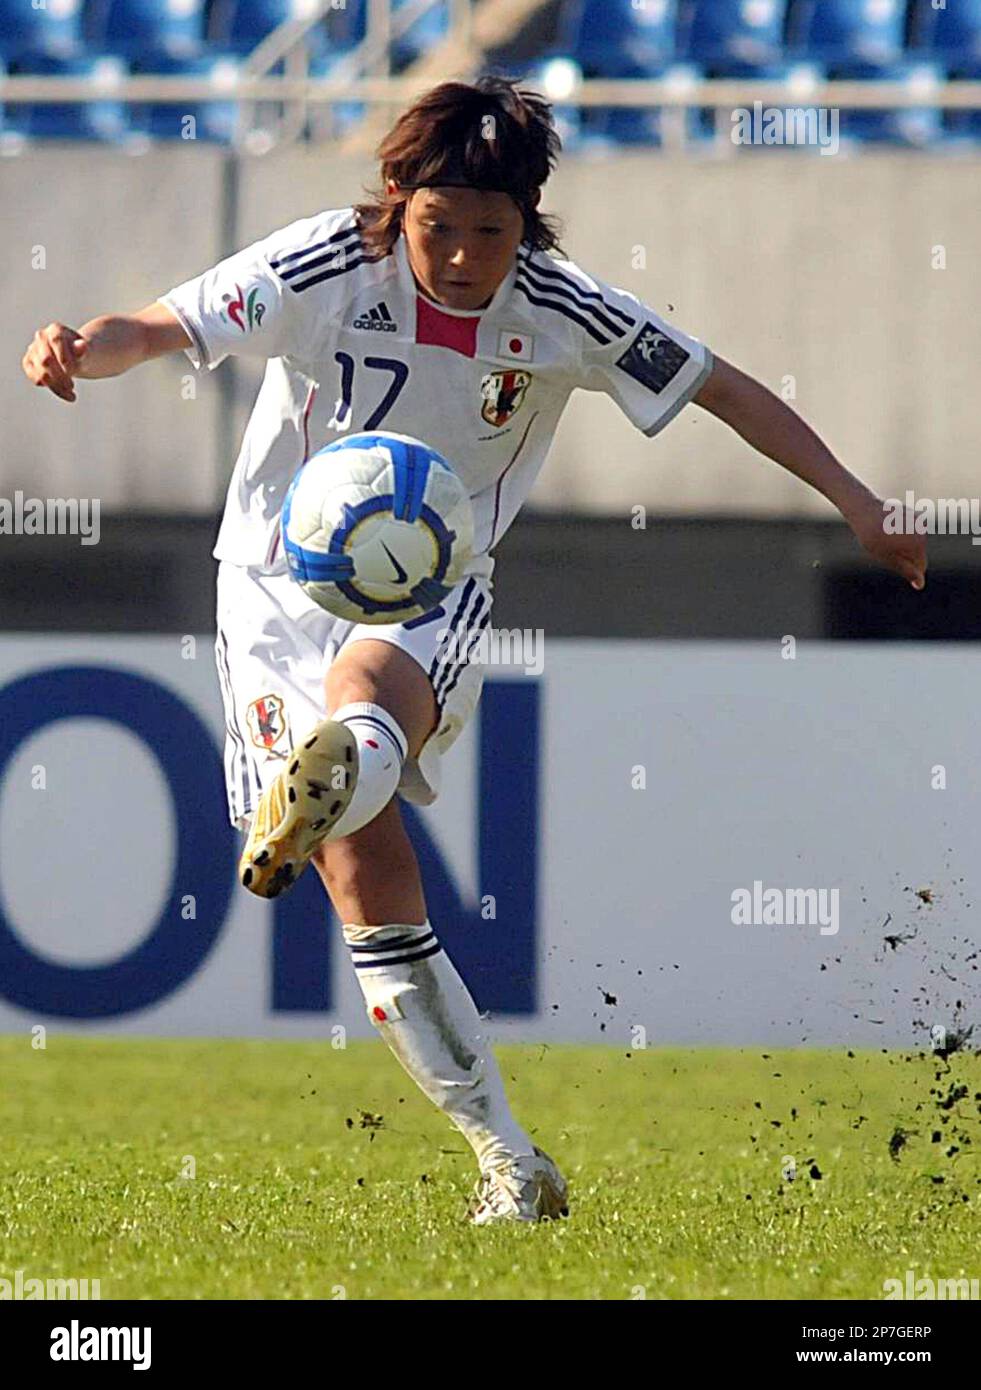 Japan's Kamionobe Megumi shoots against Thailand during a soccer match at  the 2010 AFC Women's Asian Cup in Chengdu in southwest China's Sichuan  province on Saturday, May 22, 2010. Japan won over